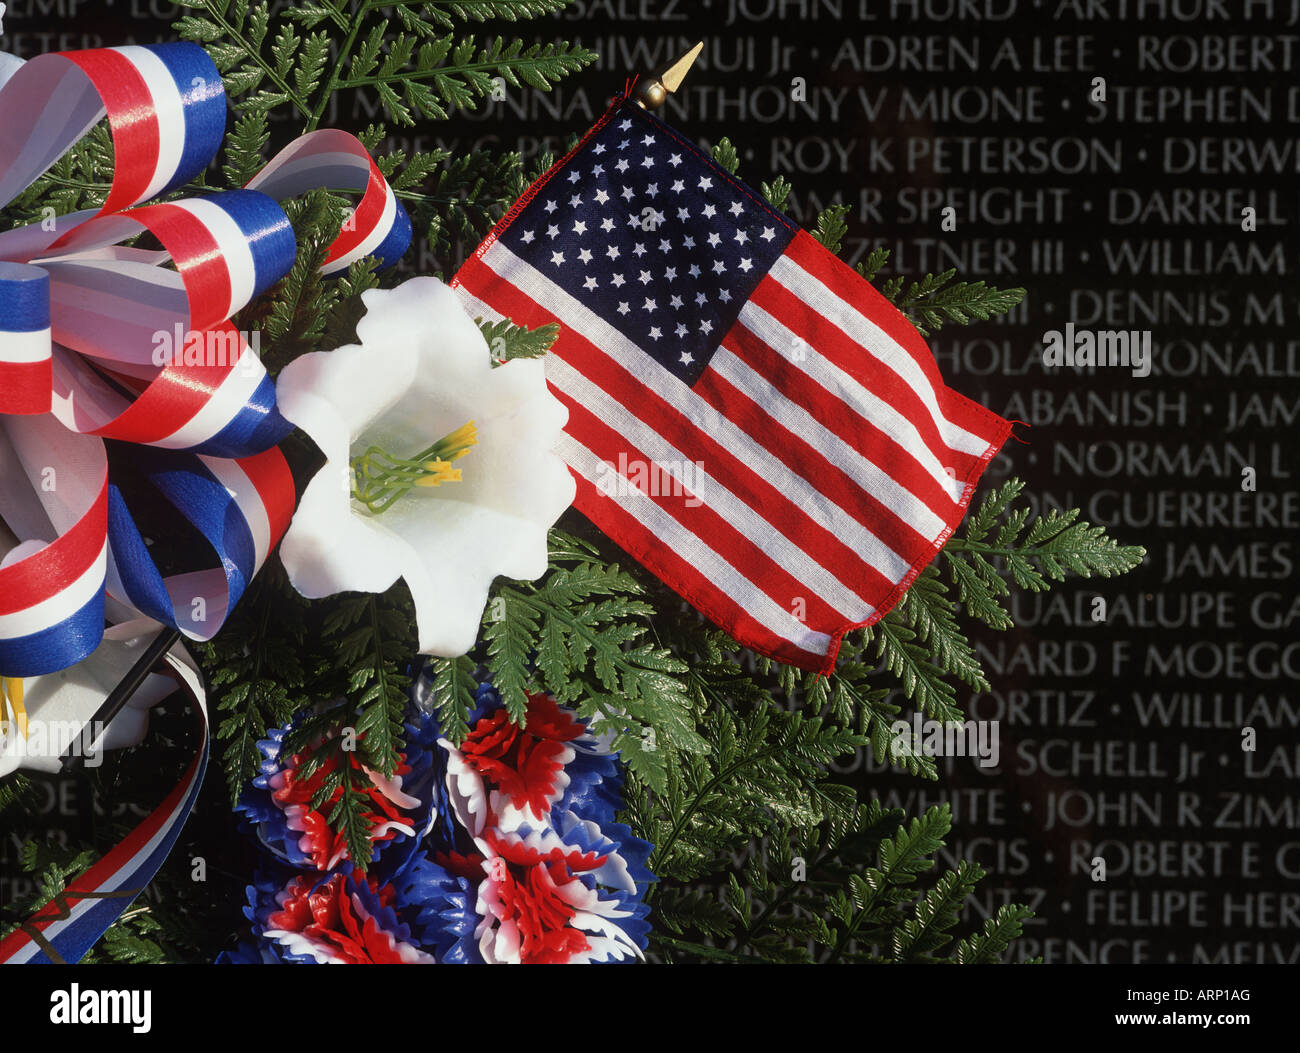 USA, Washington, DC, Vietnam Monument with floral wreath and flag Stock Photo